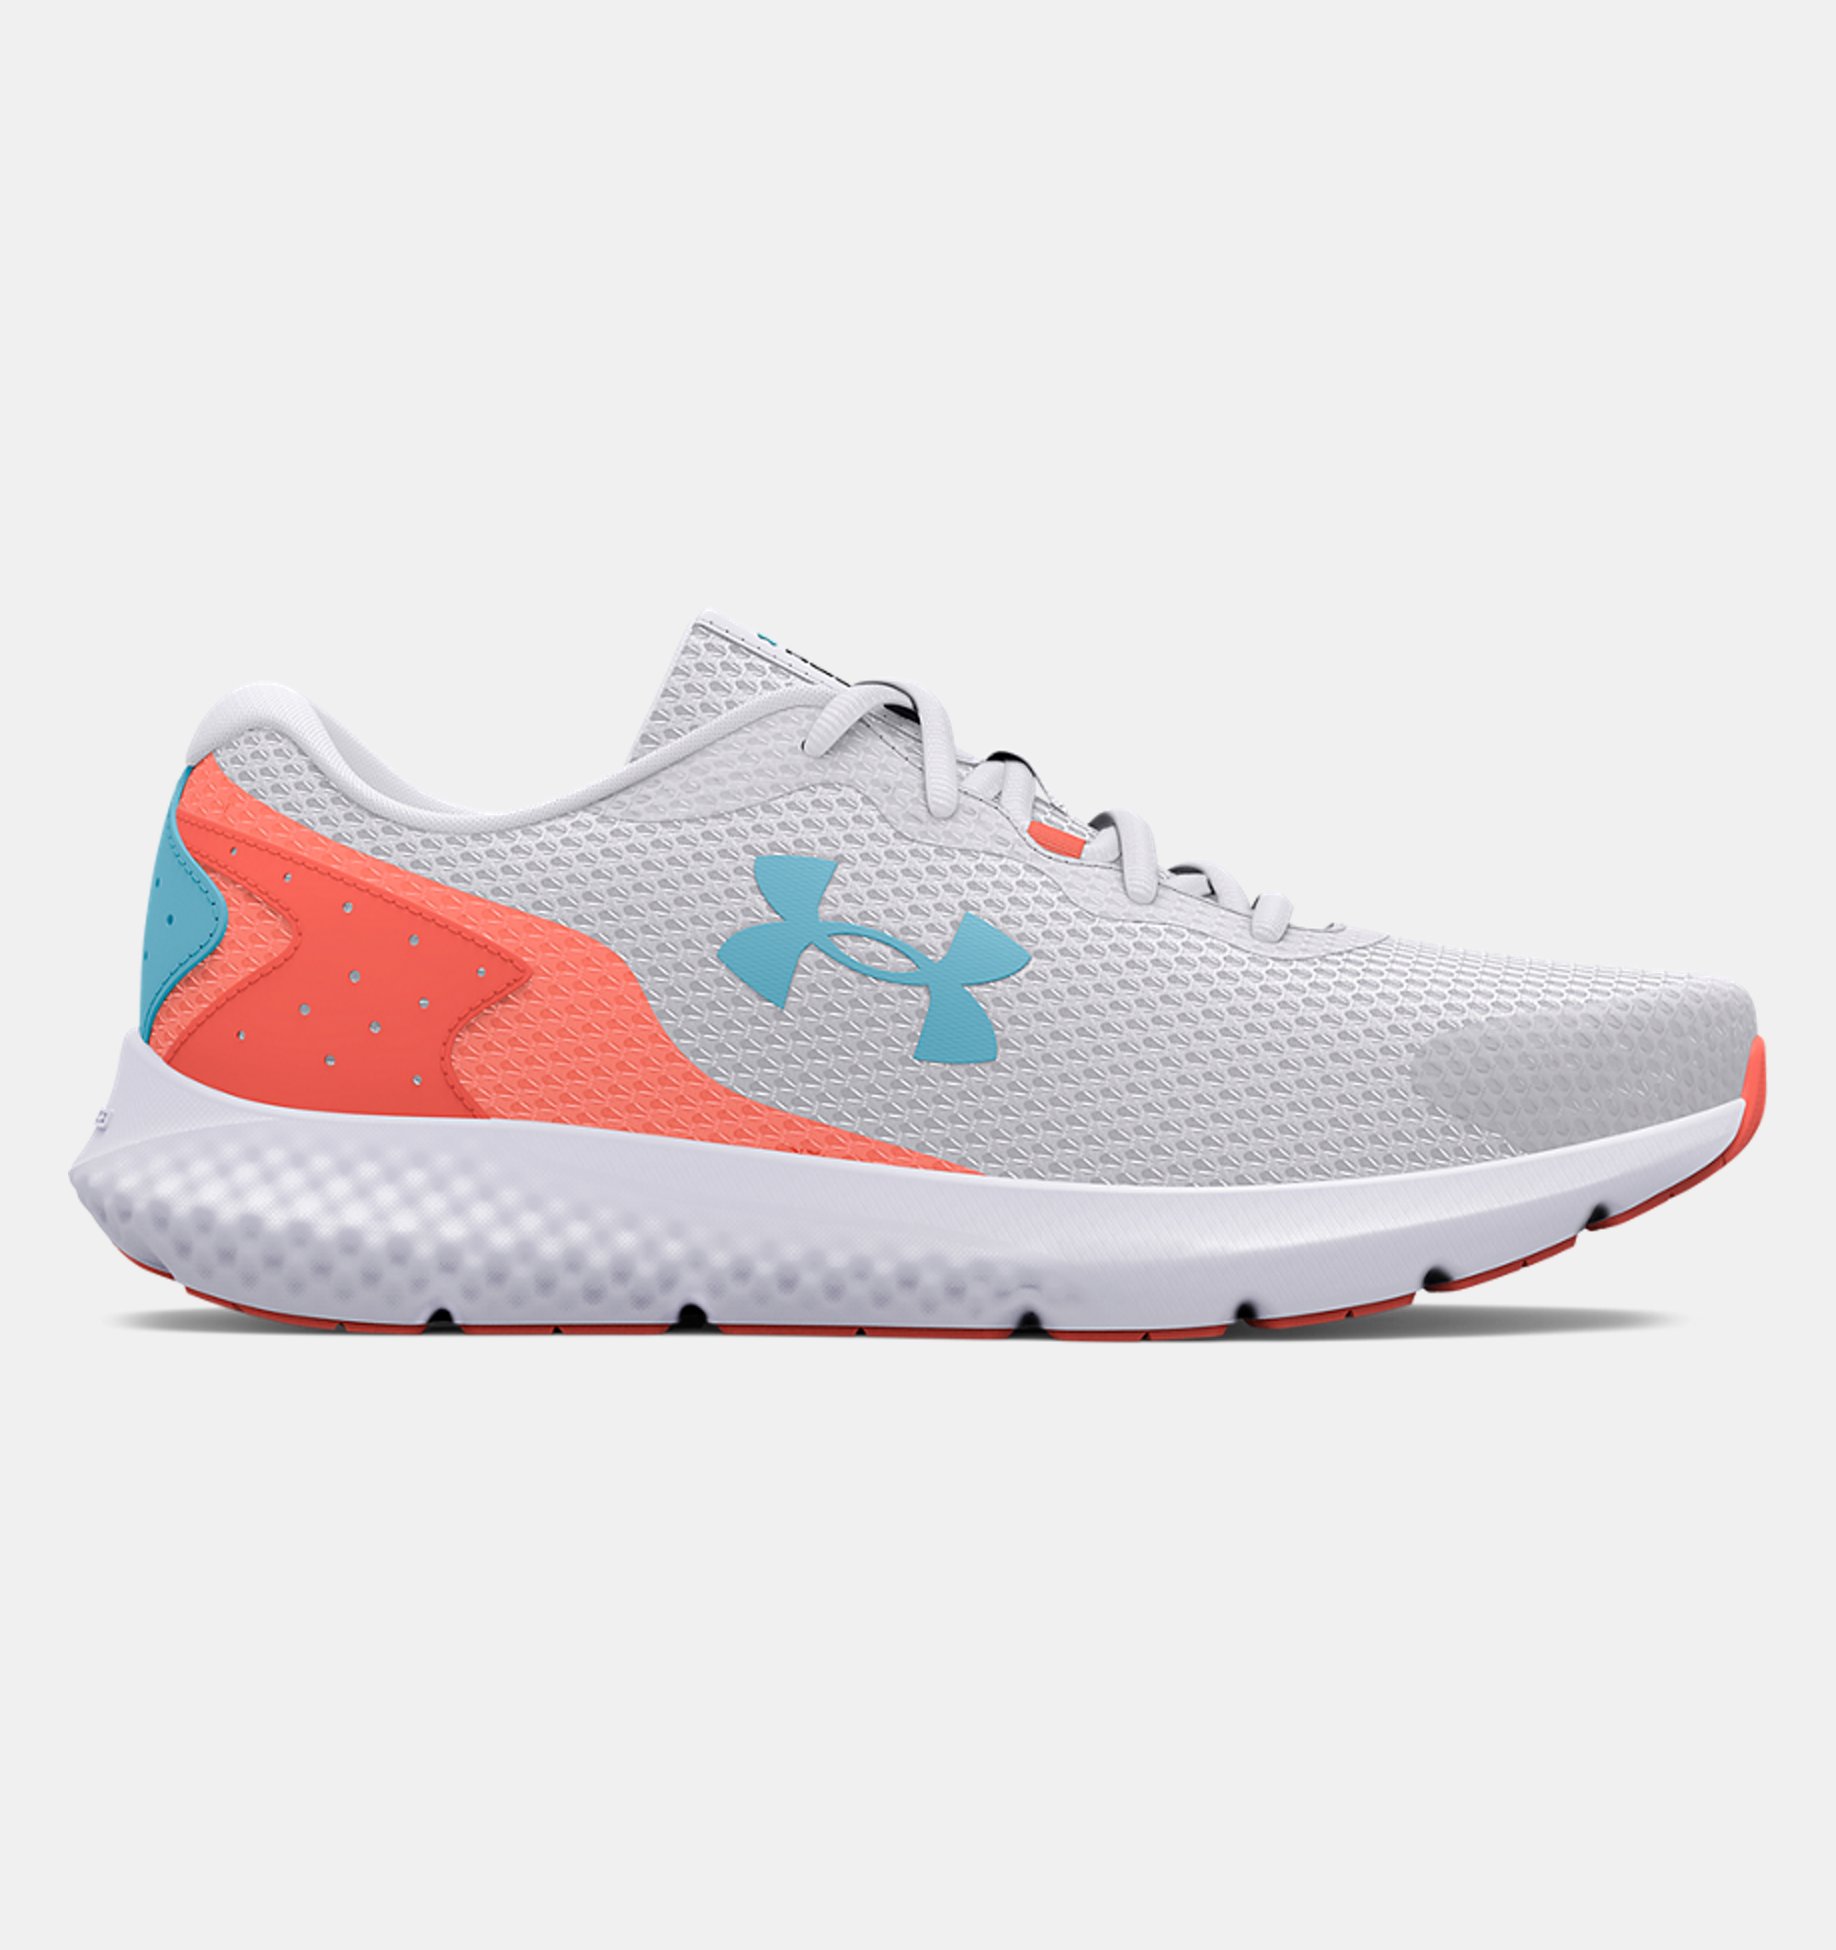 Under Armour Womens Charged Rogue Running Shoe